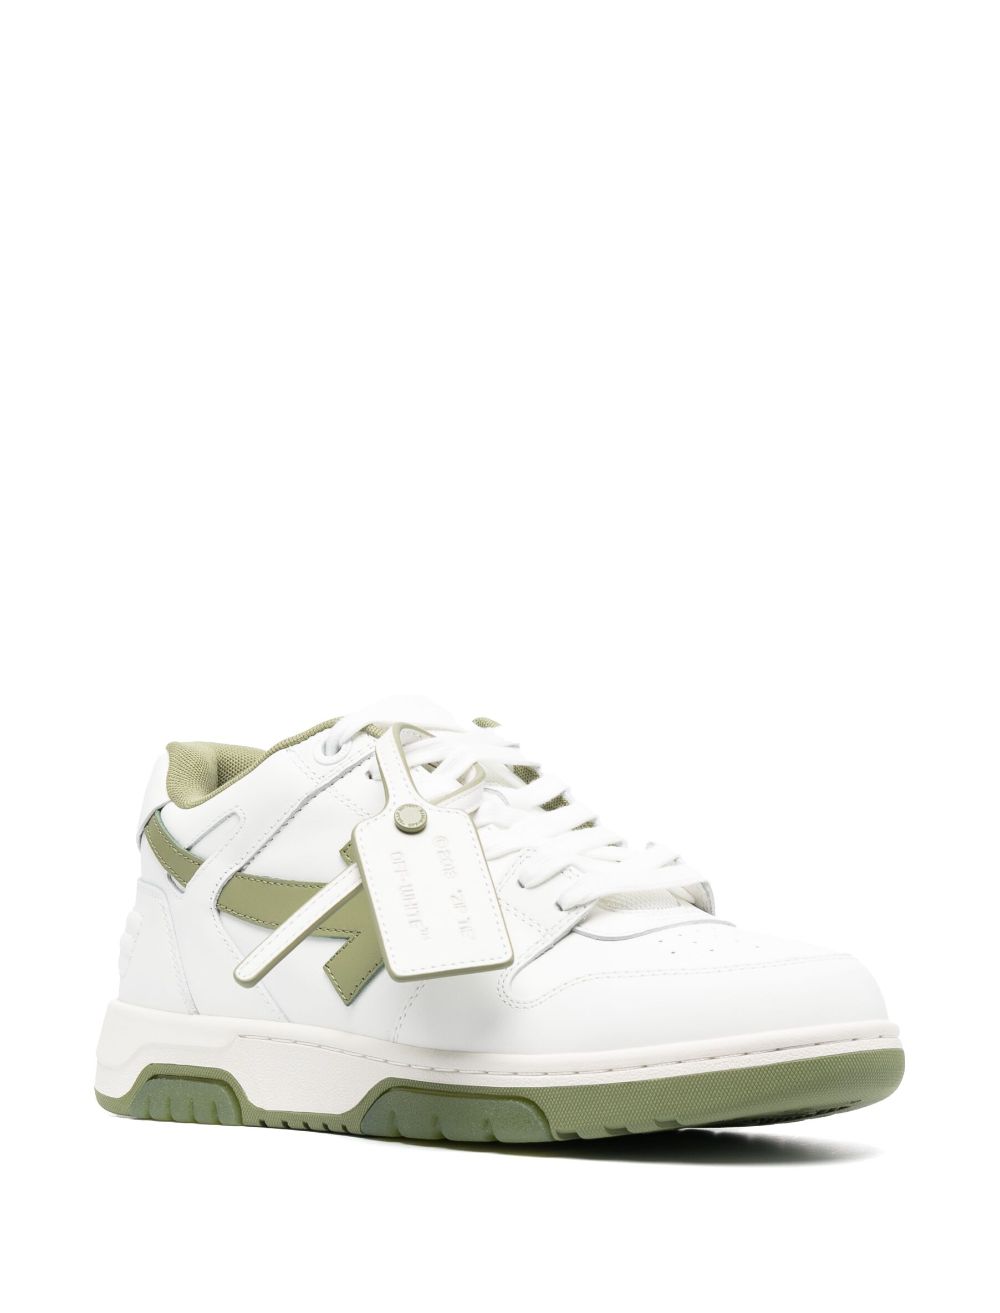 Off-White "Out Of Office ""OOO"" leren sneakers" - Wit